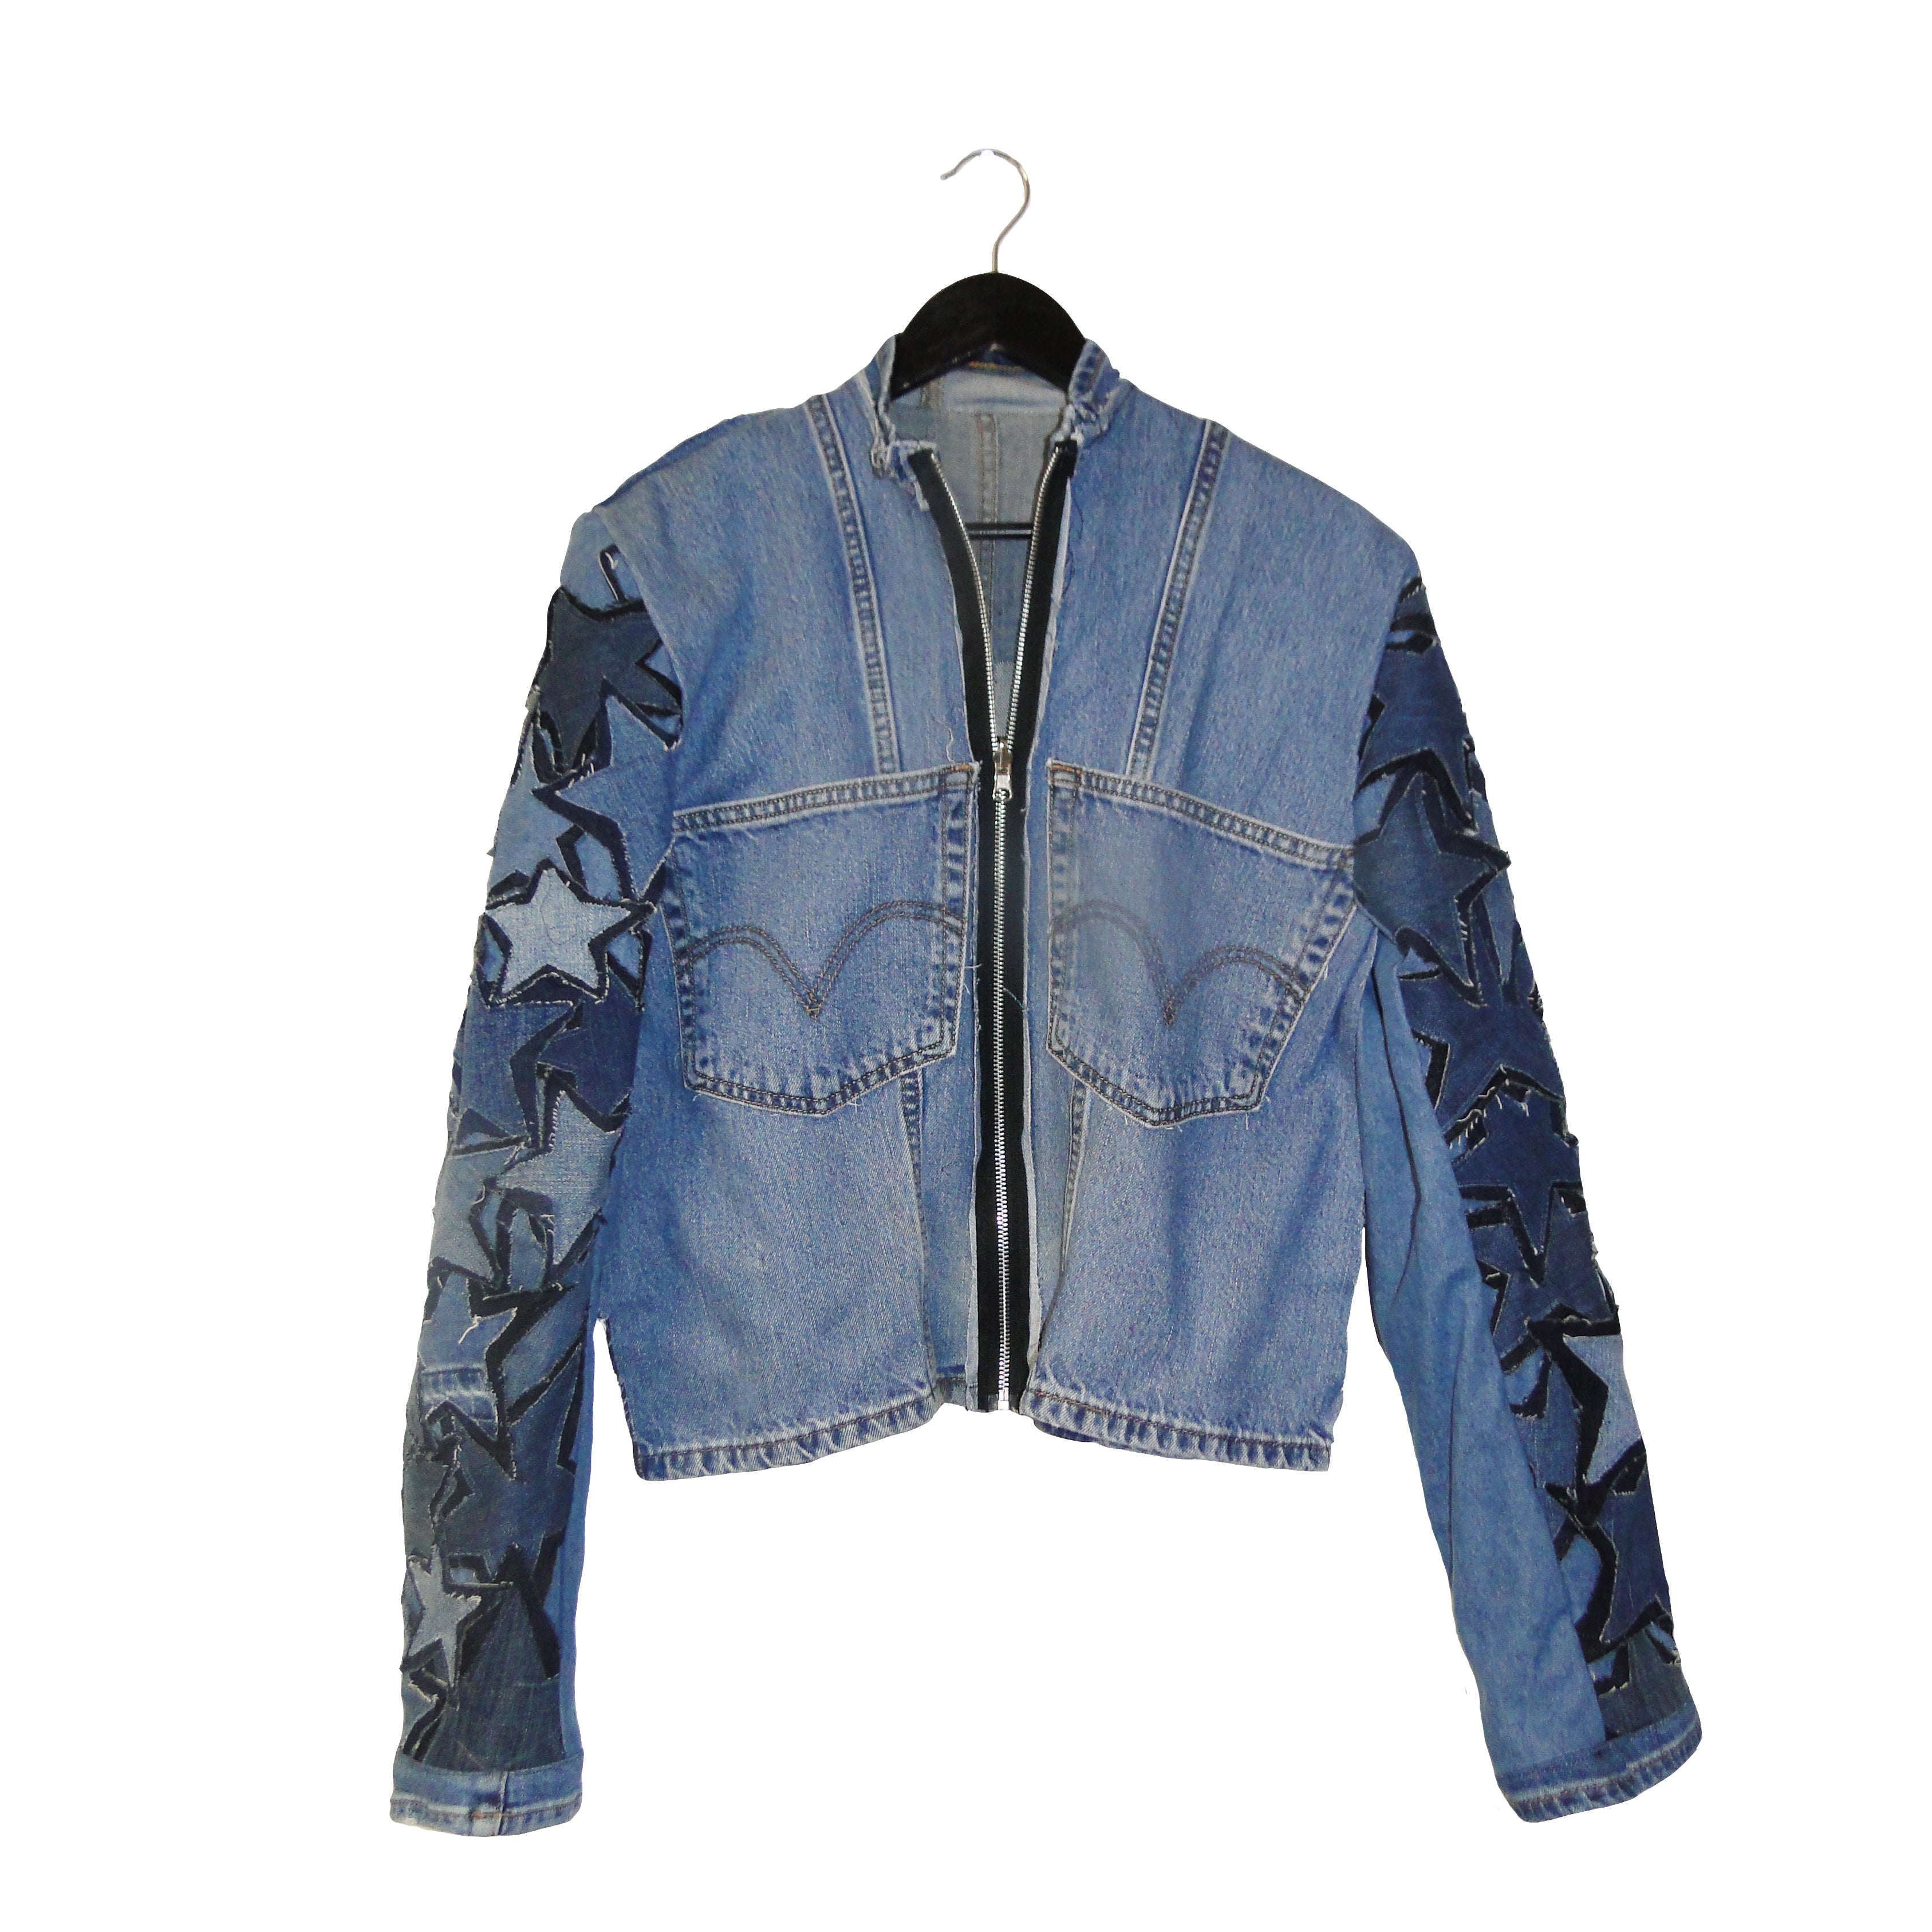 upcycled denim jacket with star patch sleeves